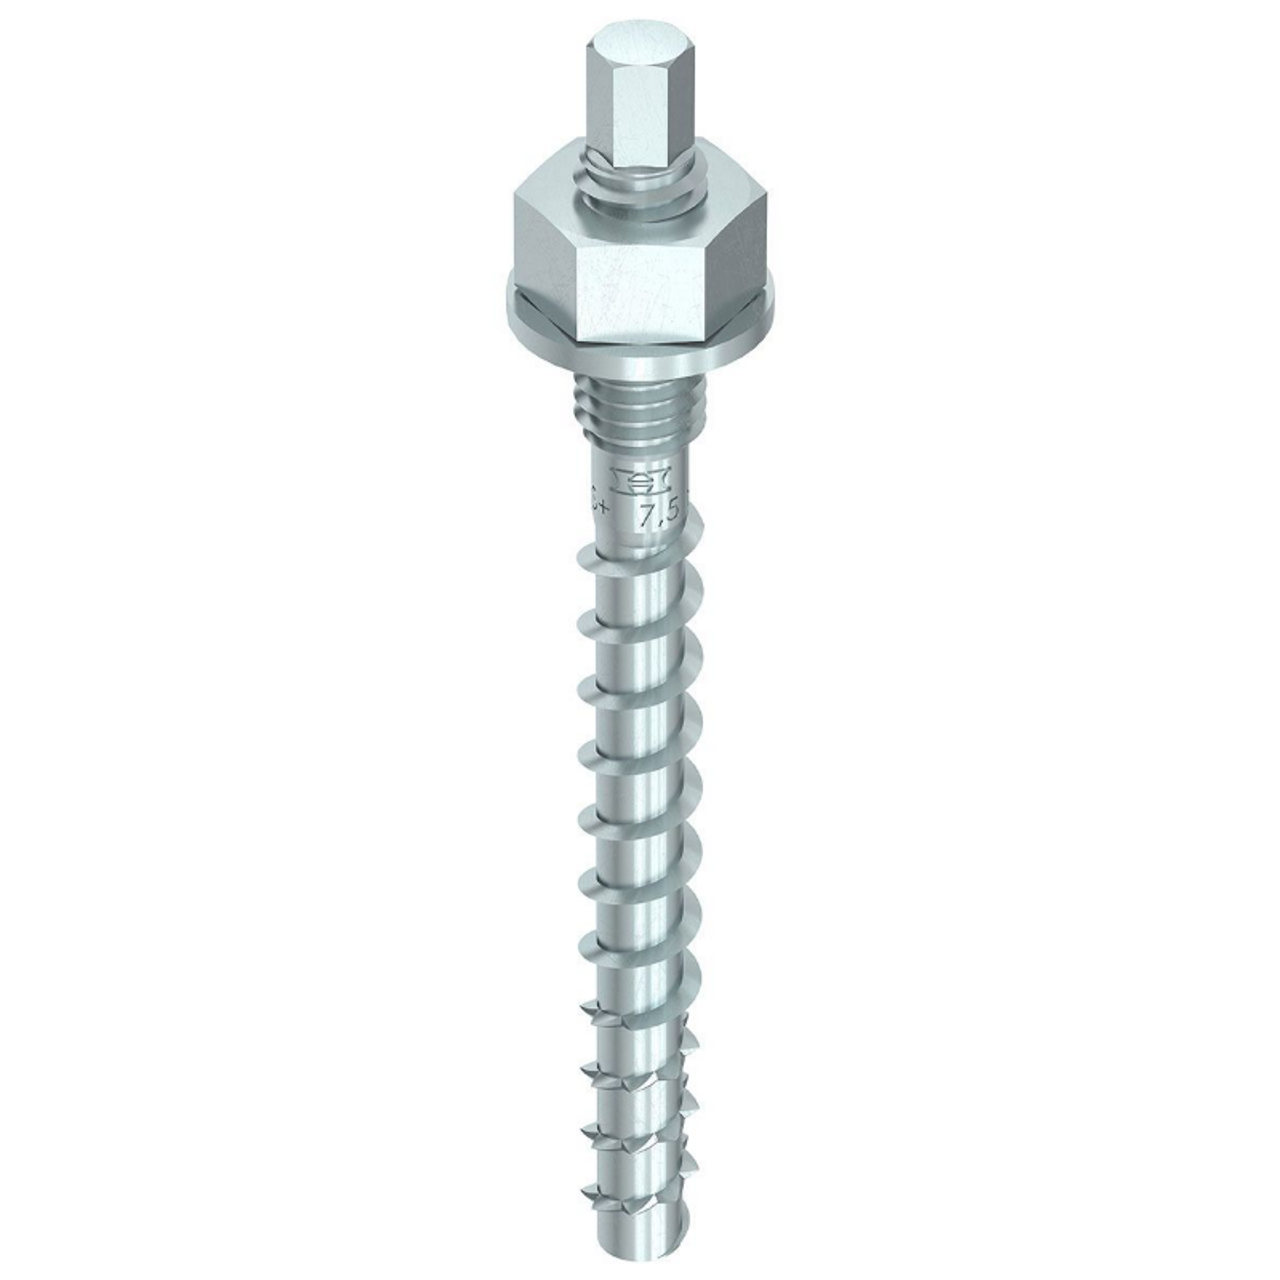 Craftsman Hardware, has a tools store where you can find Pre-Set Threaded Screw Anchor such as HECO 20mm Silver Zinc Pre-Set Threaded Screw Anchor for the Construction Industry in Australia and New Zealand